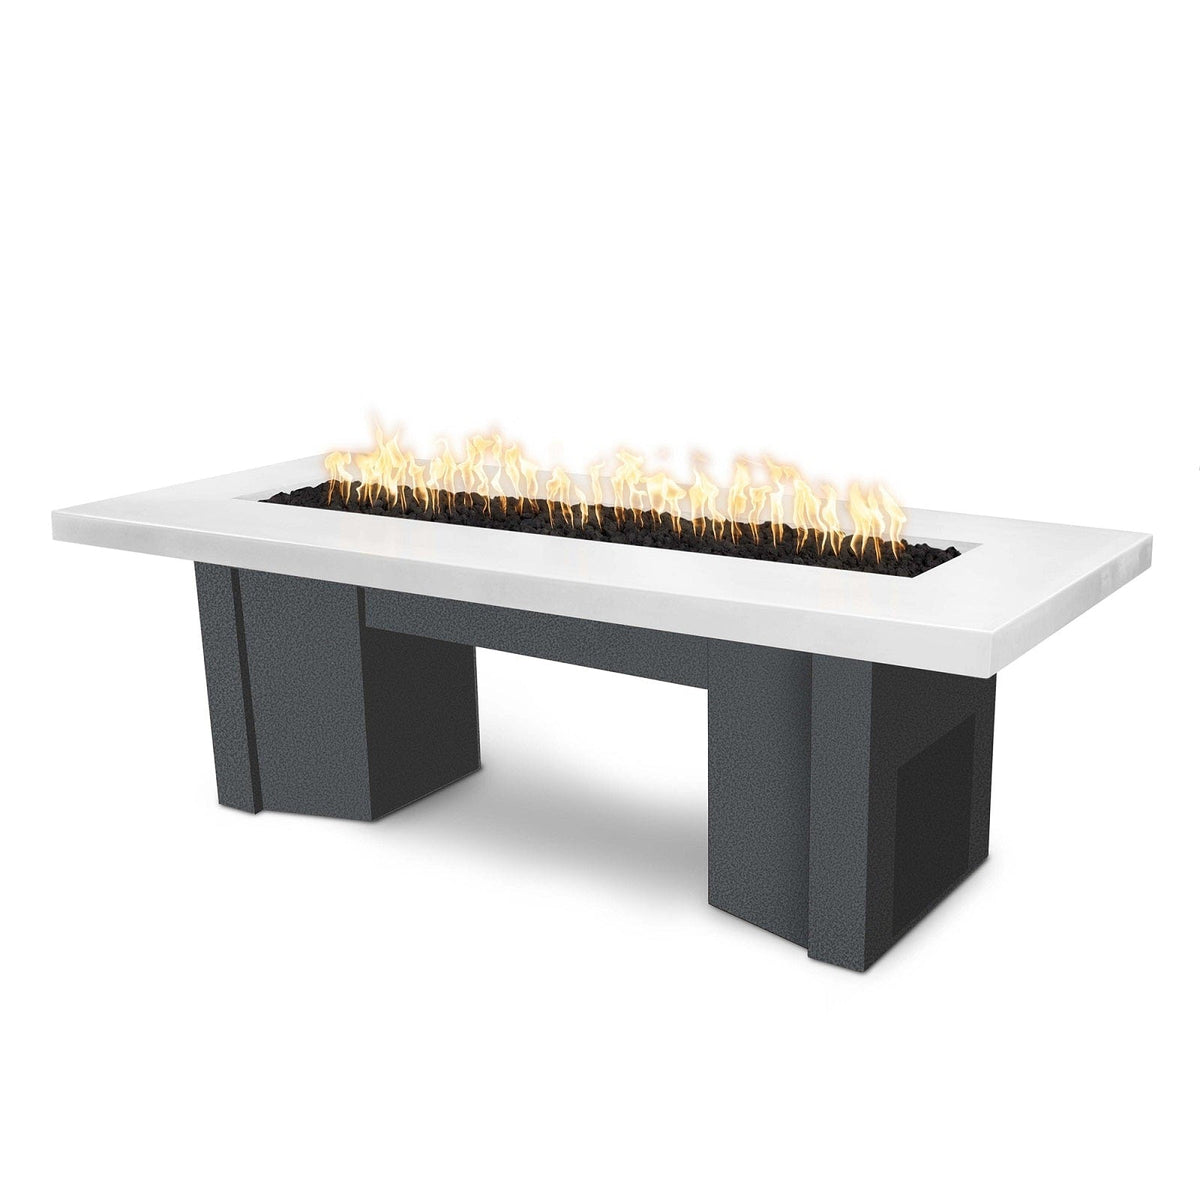 The Outdoor Plus Fire Features Limestone (-LIM) / Silver Vein Powder Coated Steel (-SLV) The Outdoor Plus 60&quot; Alameda Fire Table Smooth Concrete in Liquid Propane - Flame Sense System with Push Button Spark Igniter / OPT-ALMGFRC60FSEN-LP